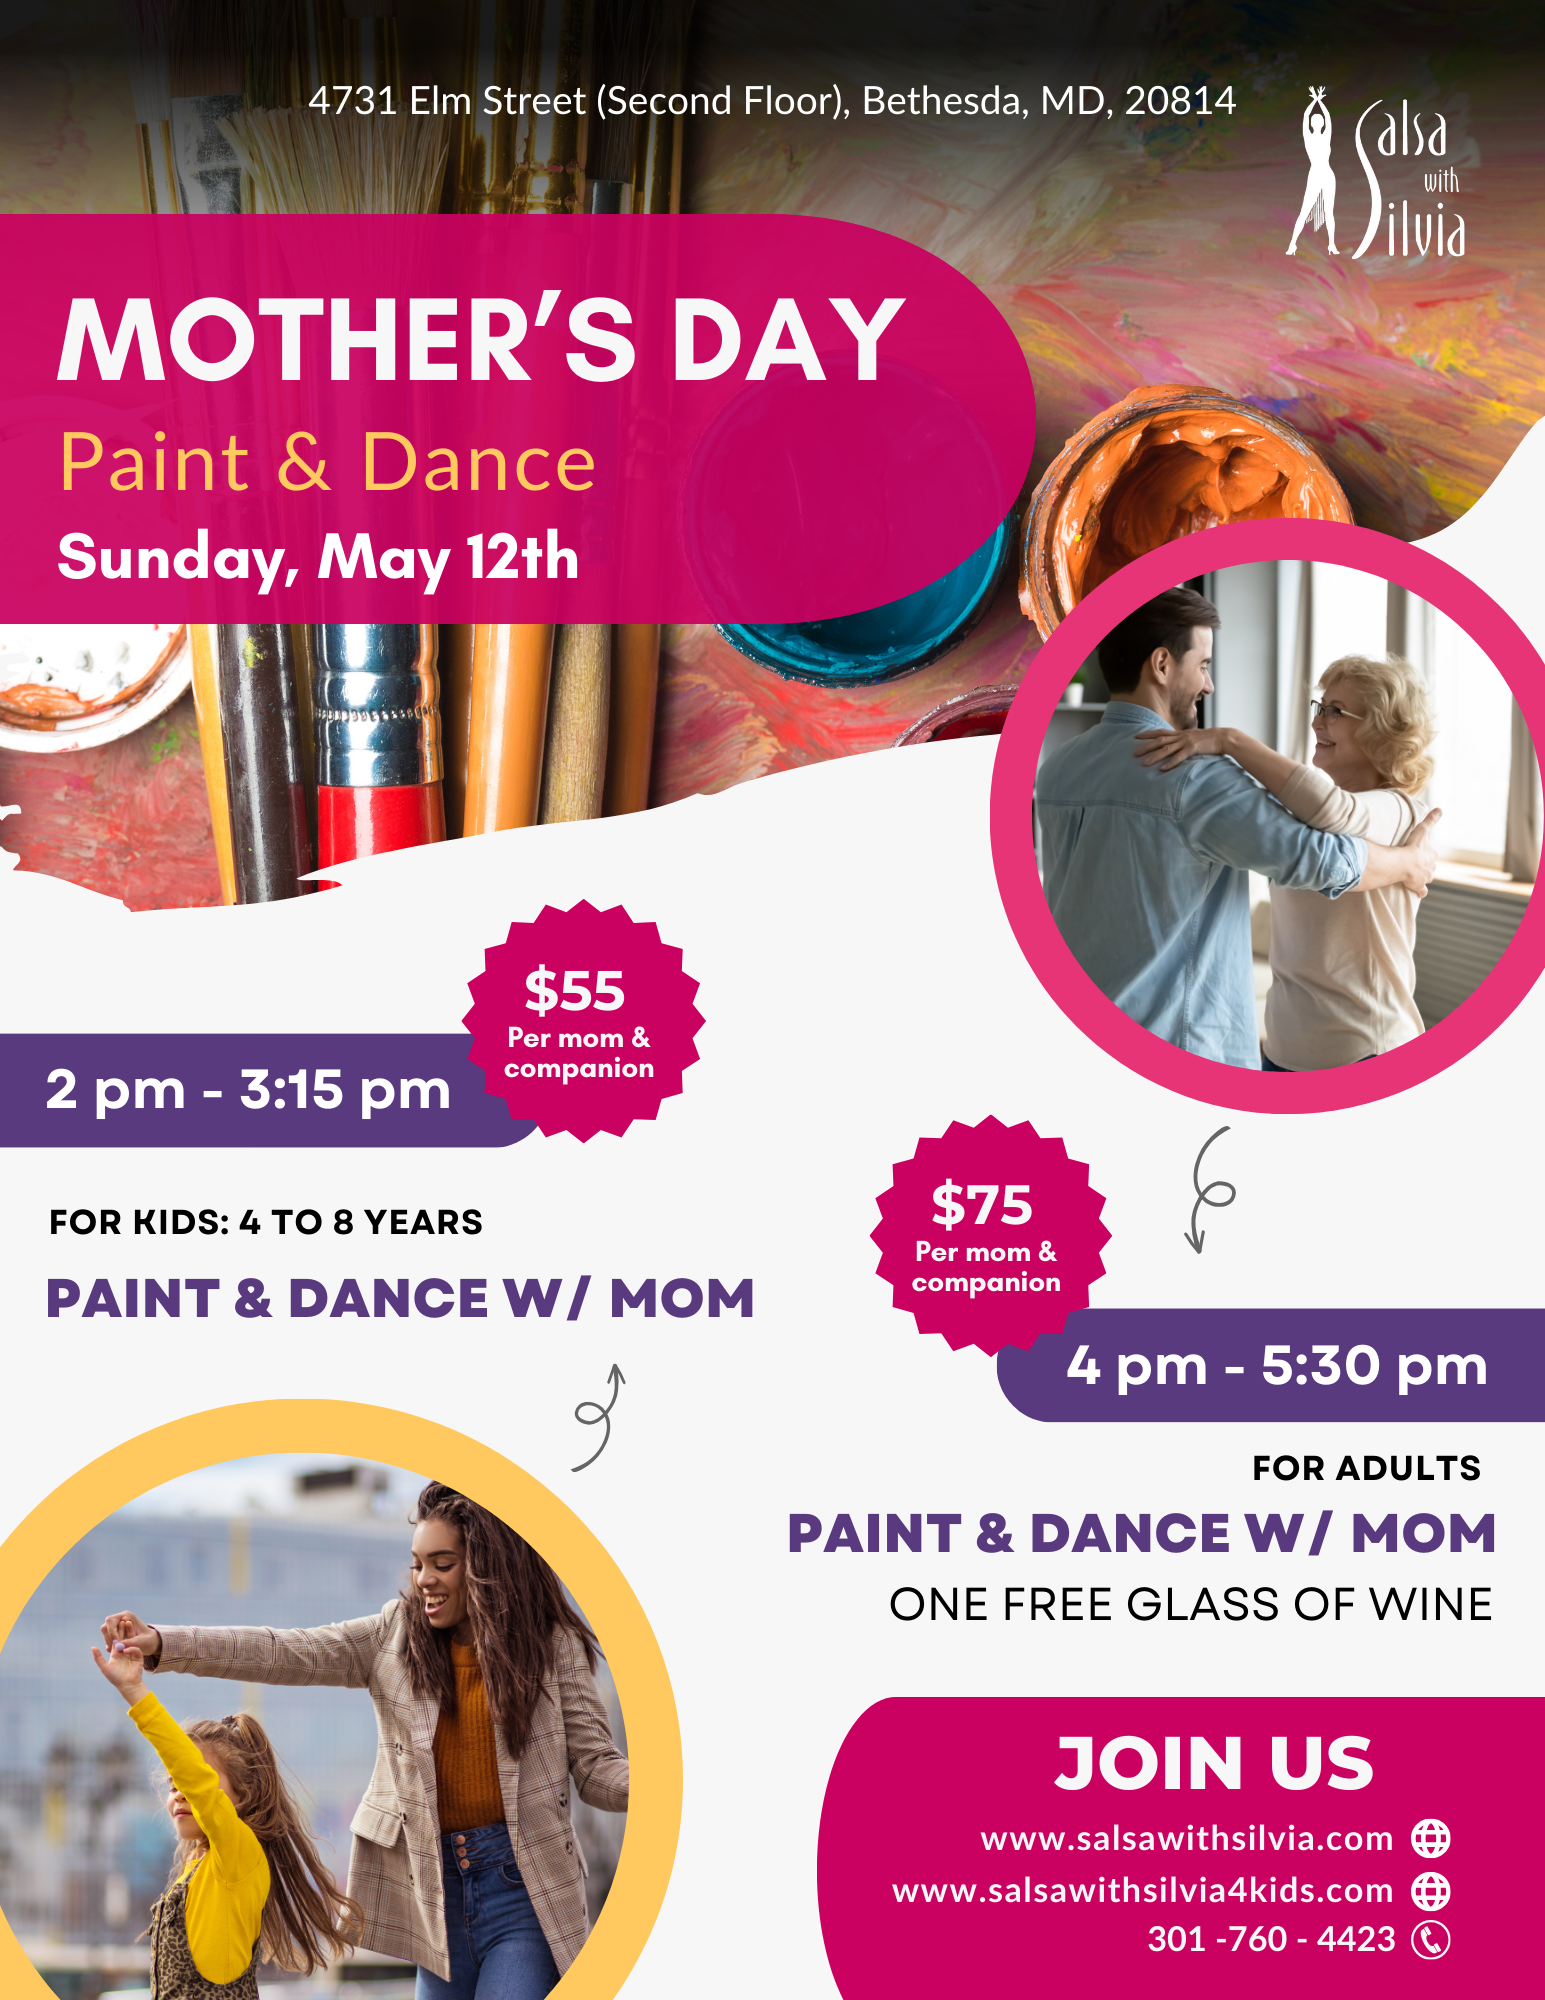 MOTHER'S DAY: PAINT & DANCE WITH MOM for kids